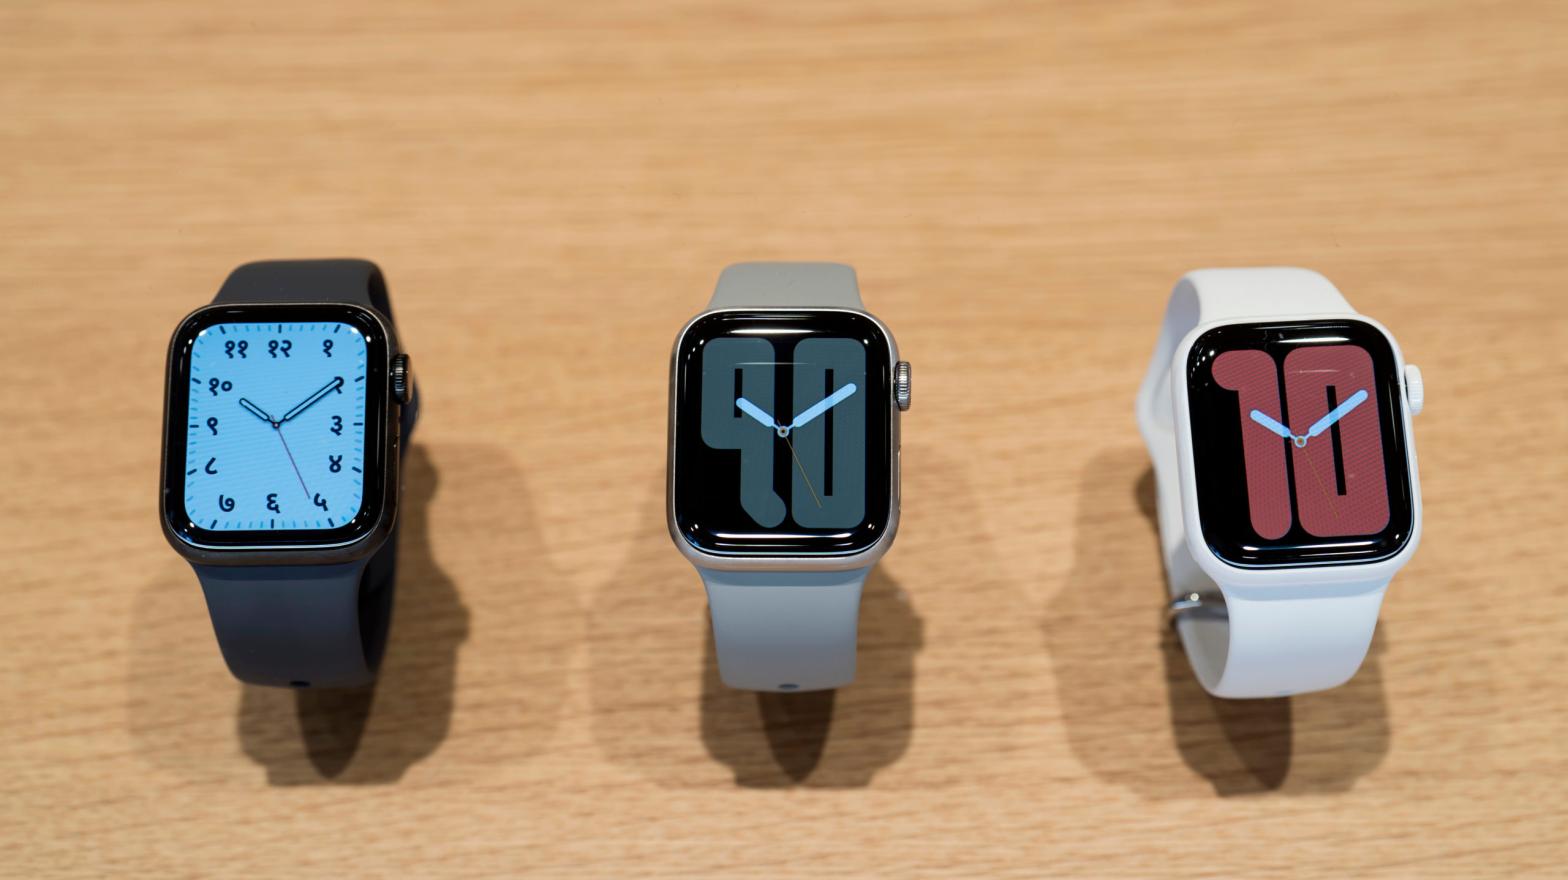 Apple Watch Series 5 devices are displayed in the Apple Marunouchi store on September 20, 2019 in Tokyo, Japan. (Photo: Tomohiro Ohsumi, Getty Images)